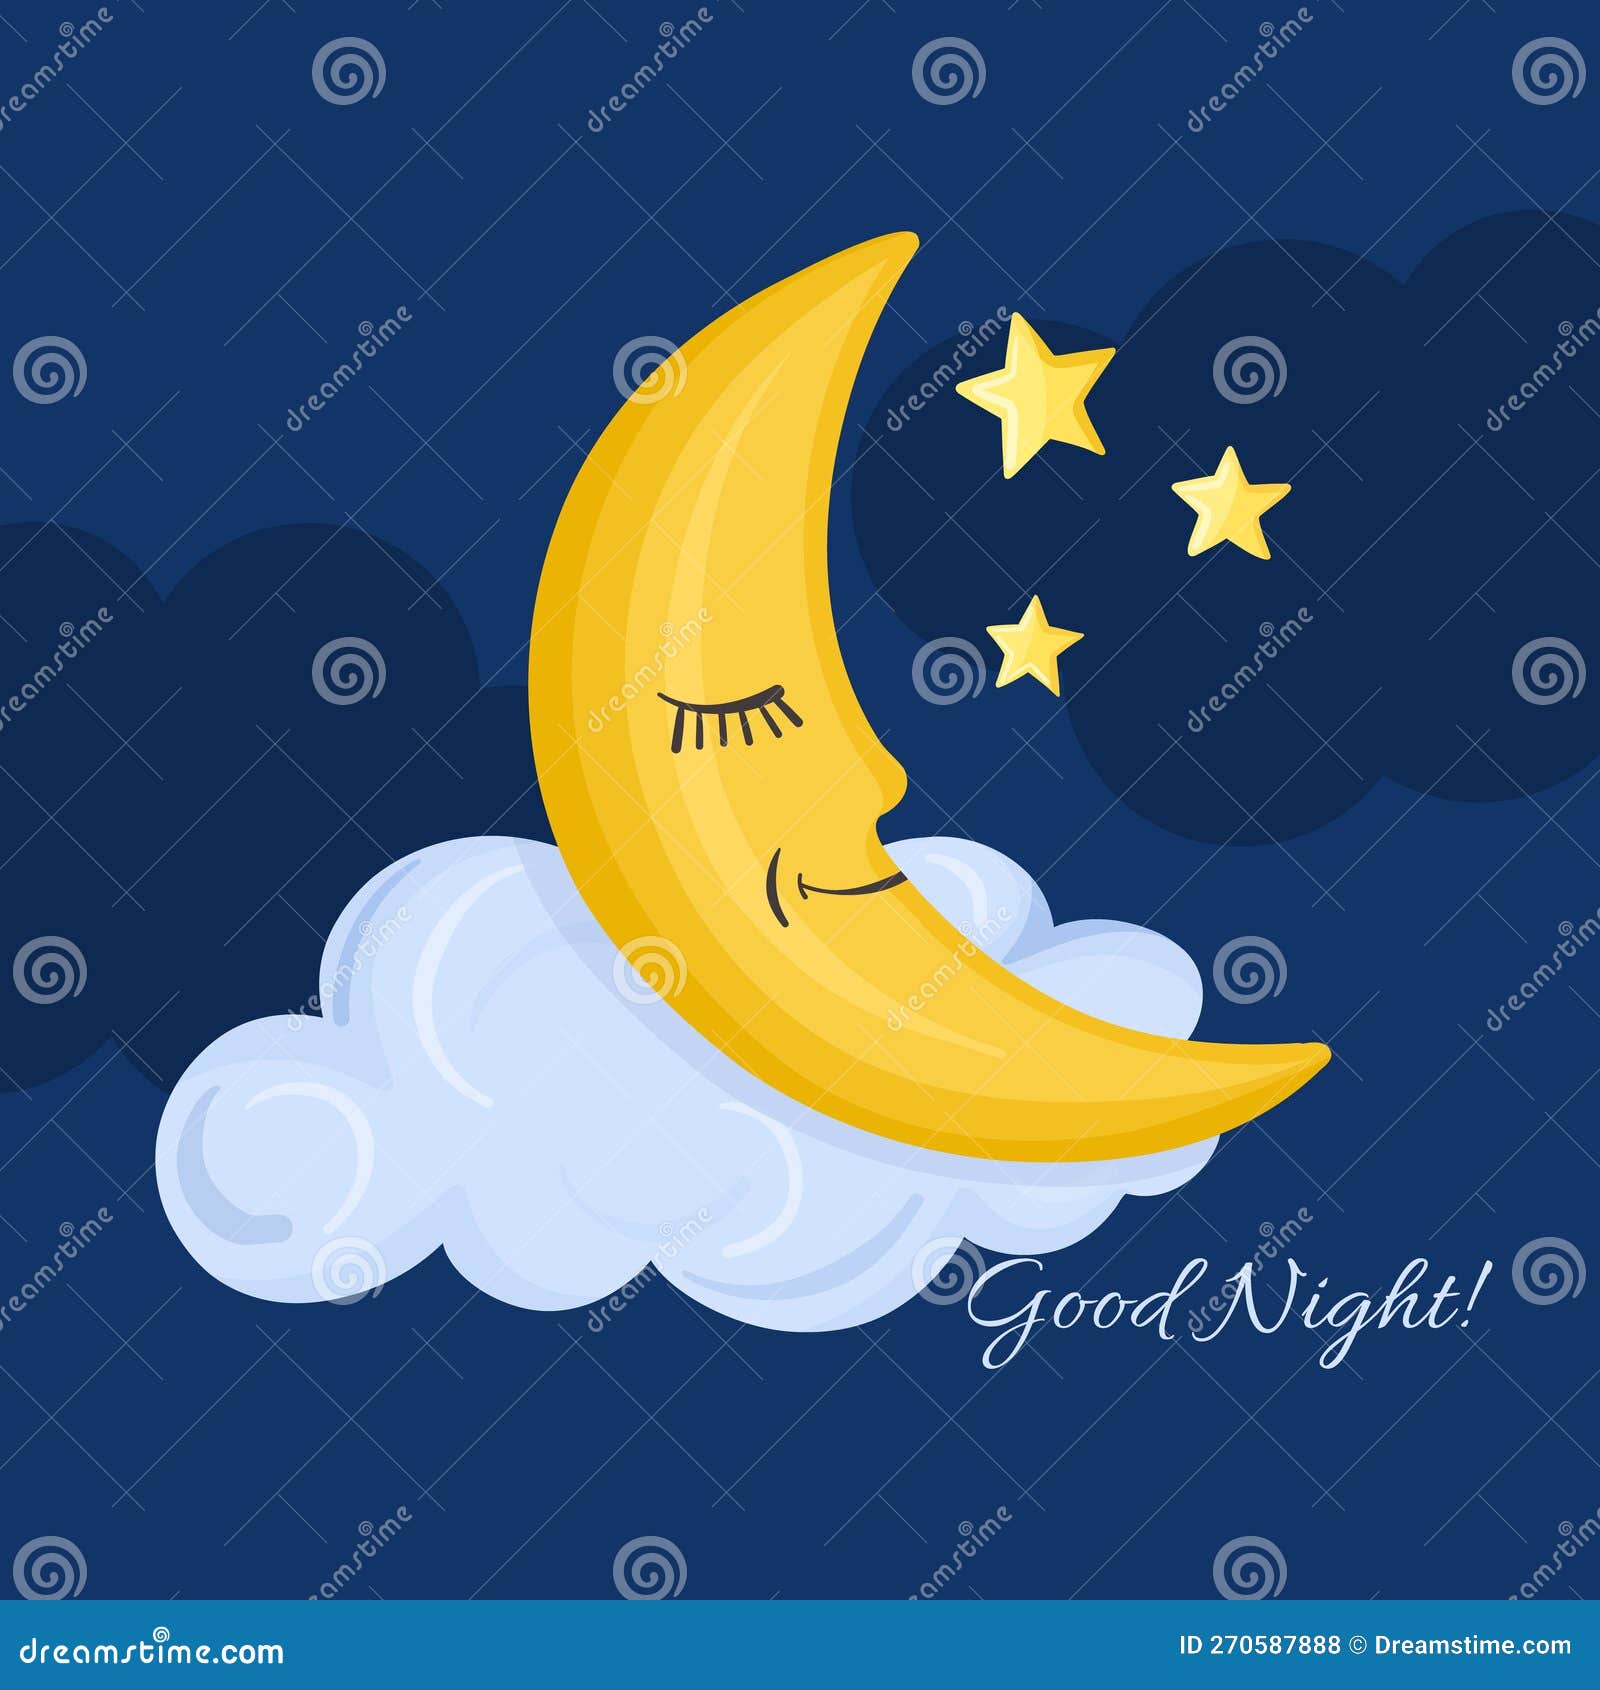 Cute Yellow Half-moon in the Night Sky with Stars and Lettering Good ...